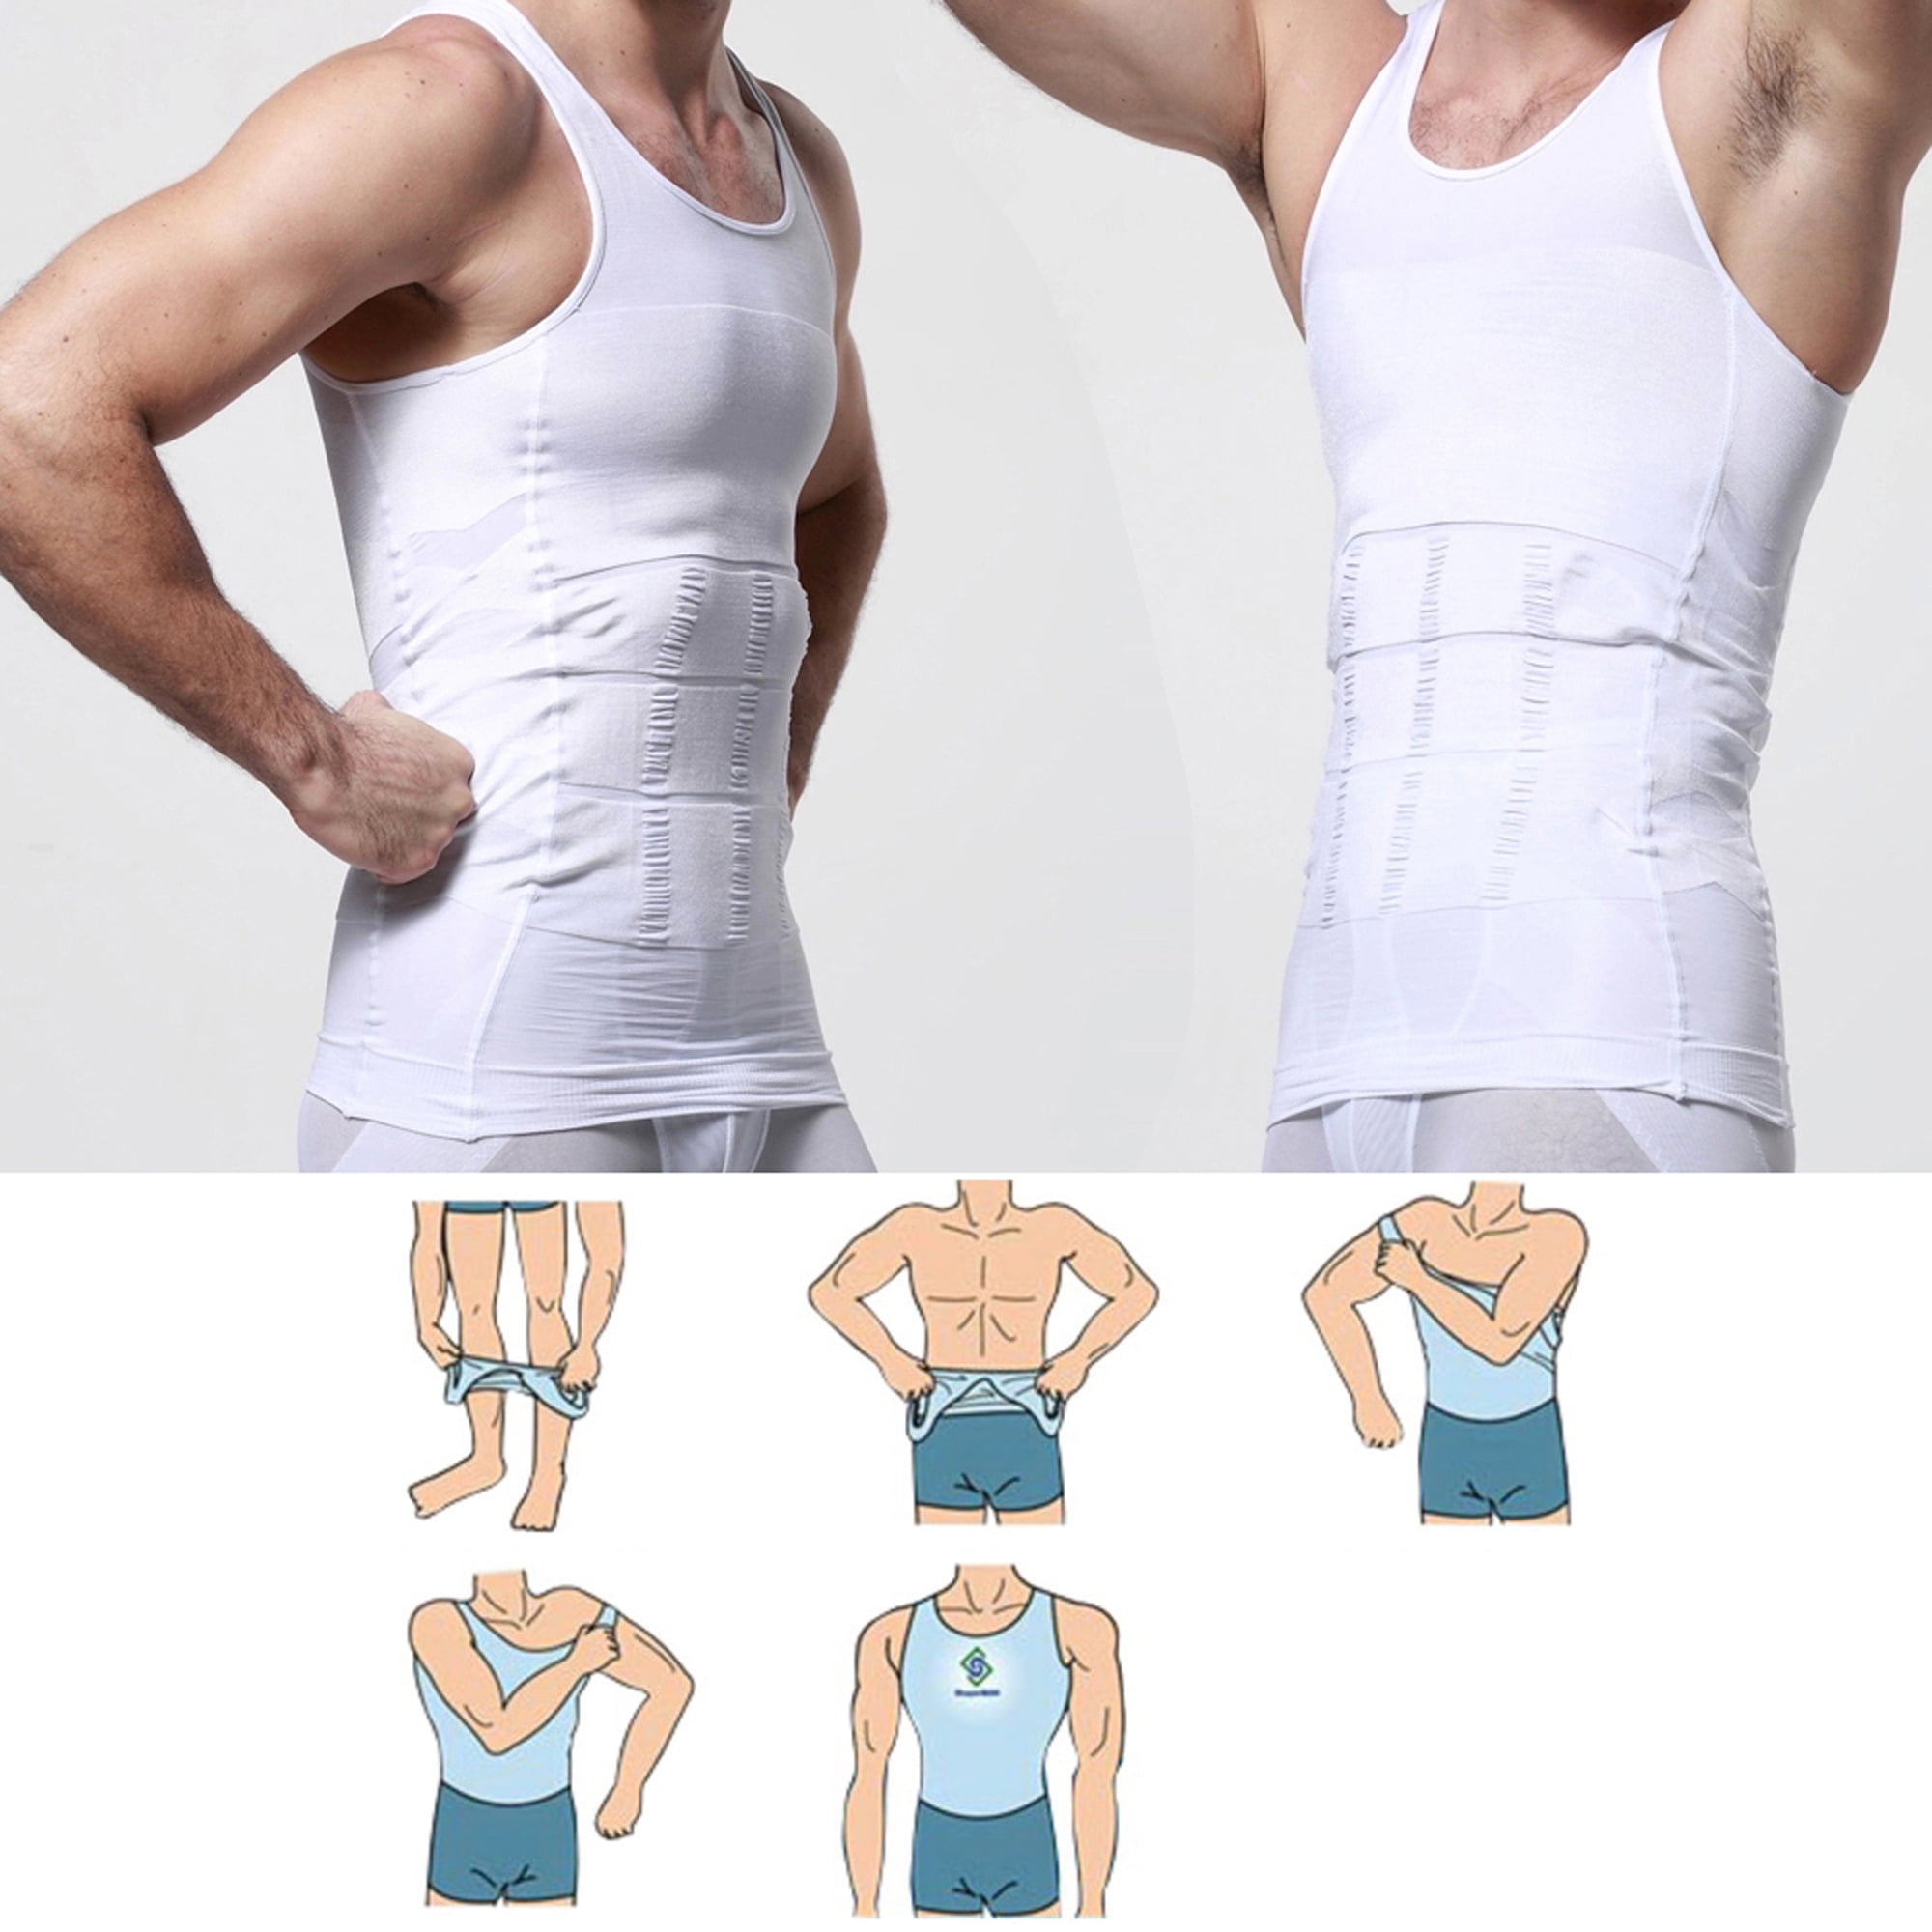 How to Reduce Waist Size in Men